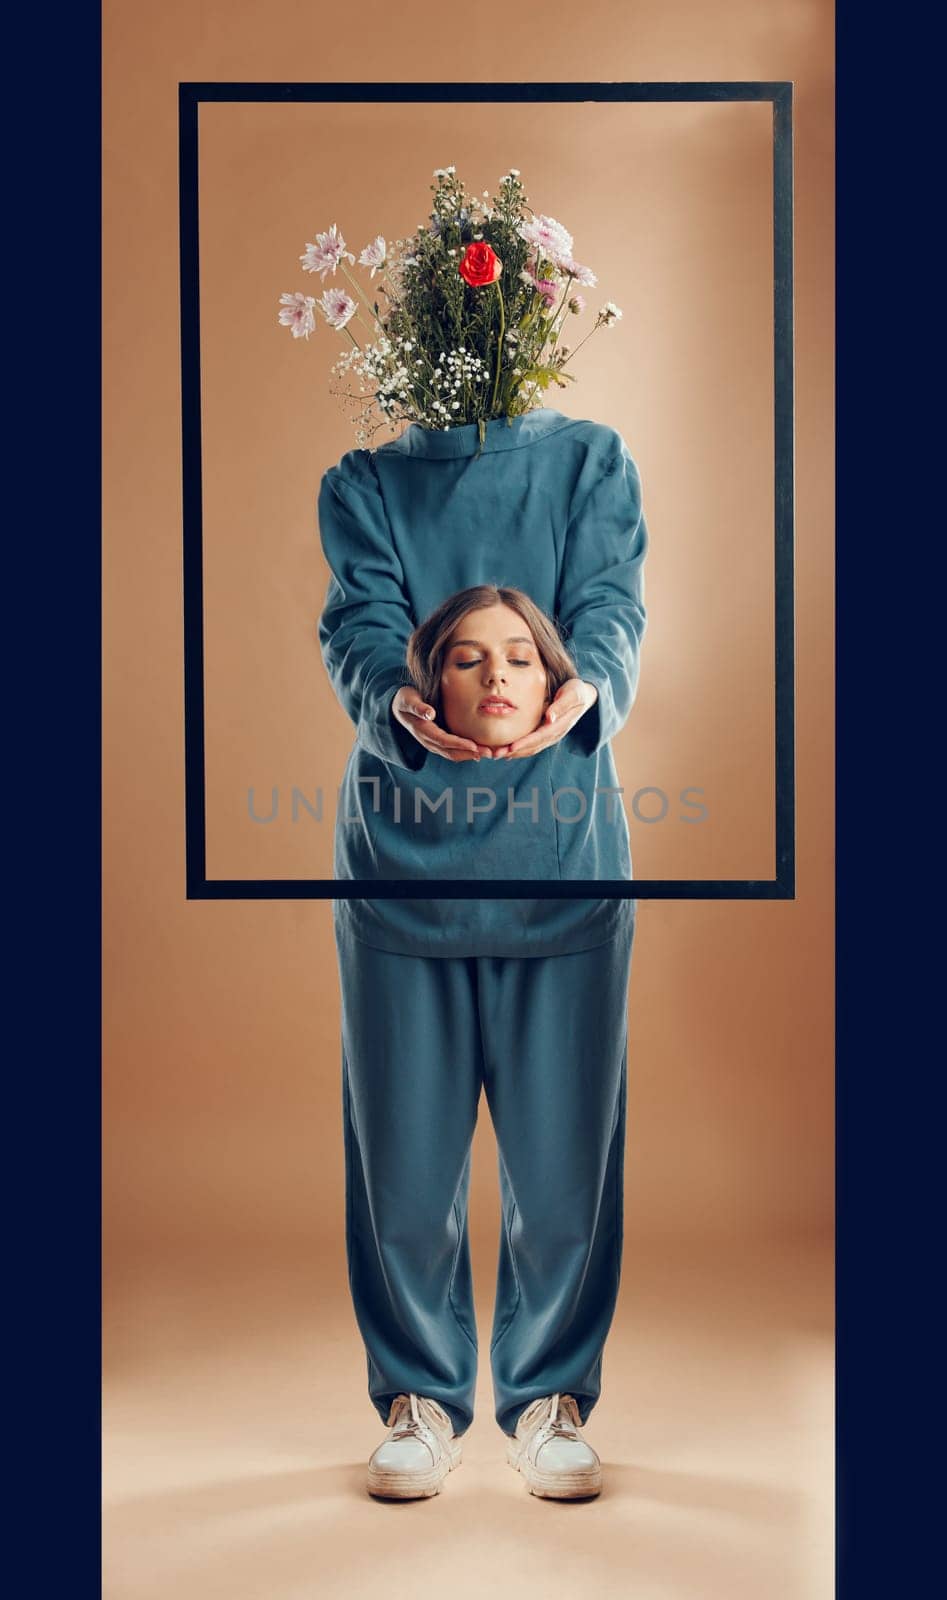 Woman, fashion or abstract art with flowers on studio background, picture frame or manipulation photography. Beauty model, faceless head or plant bouquet in freedom empowerment or creative aesthetic.